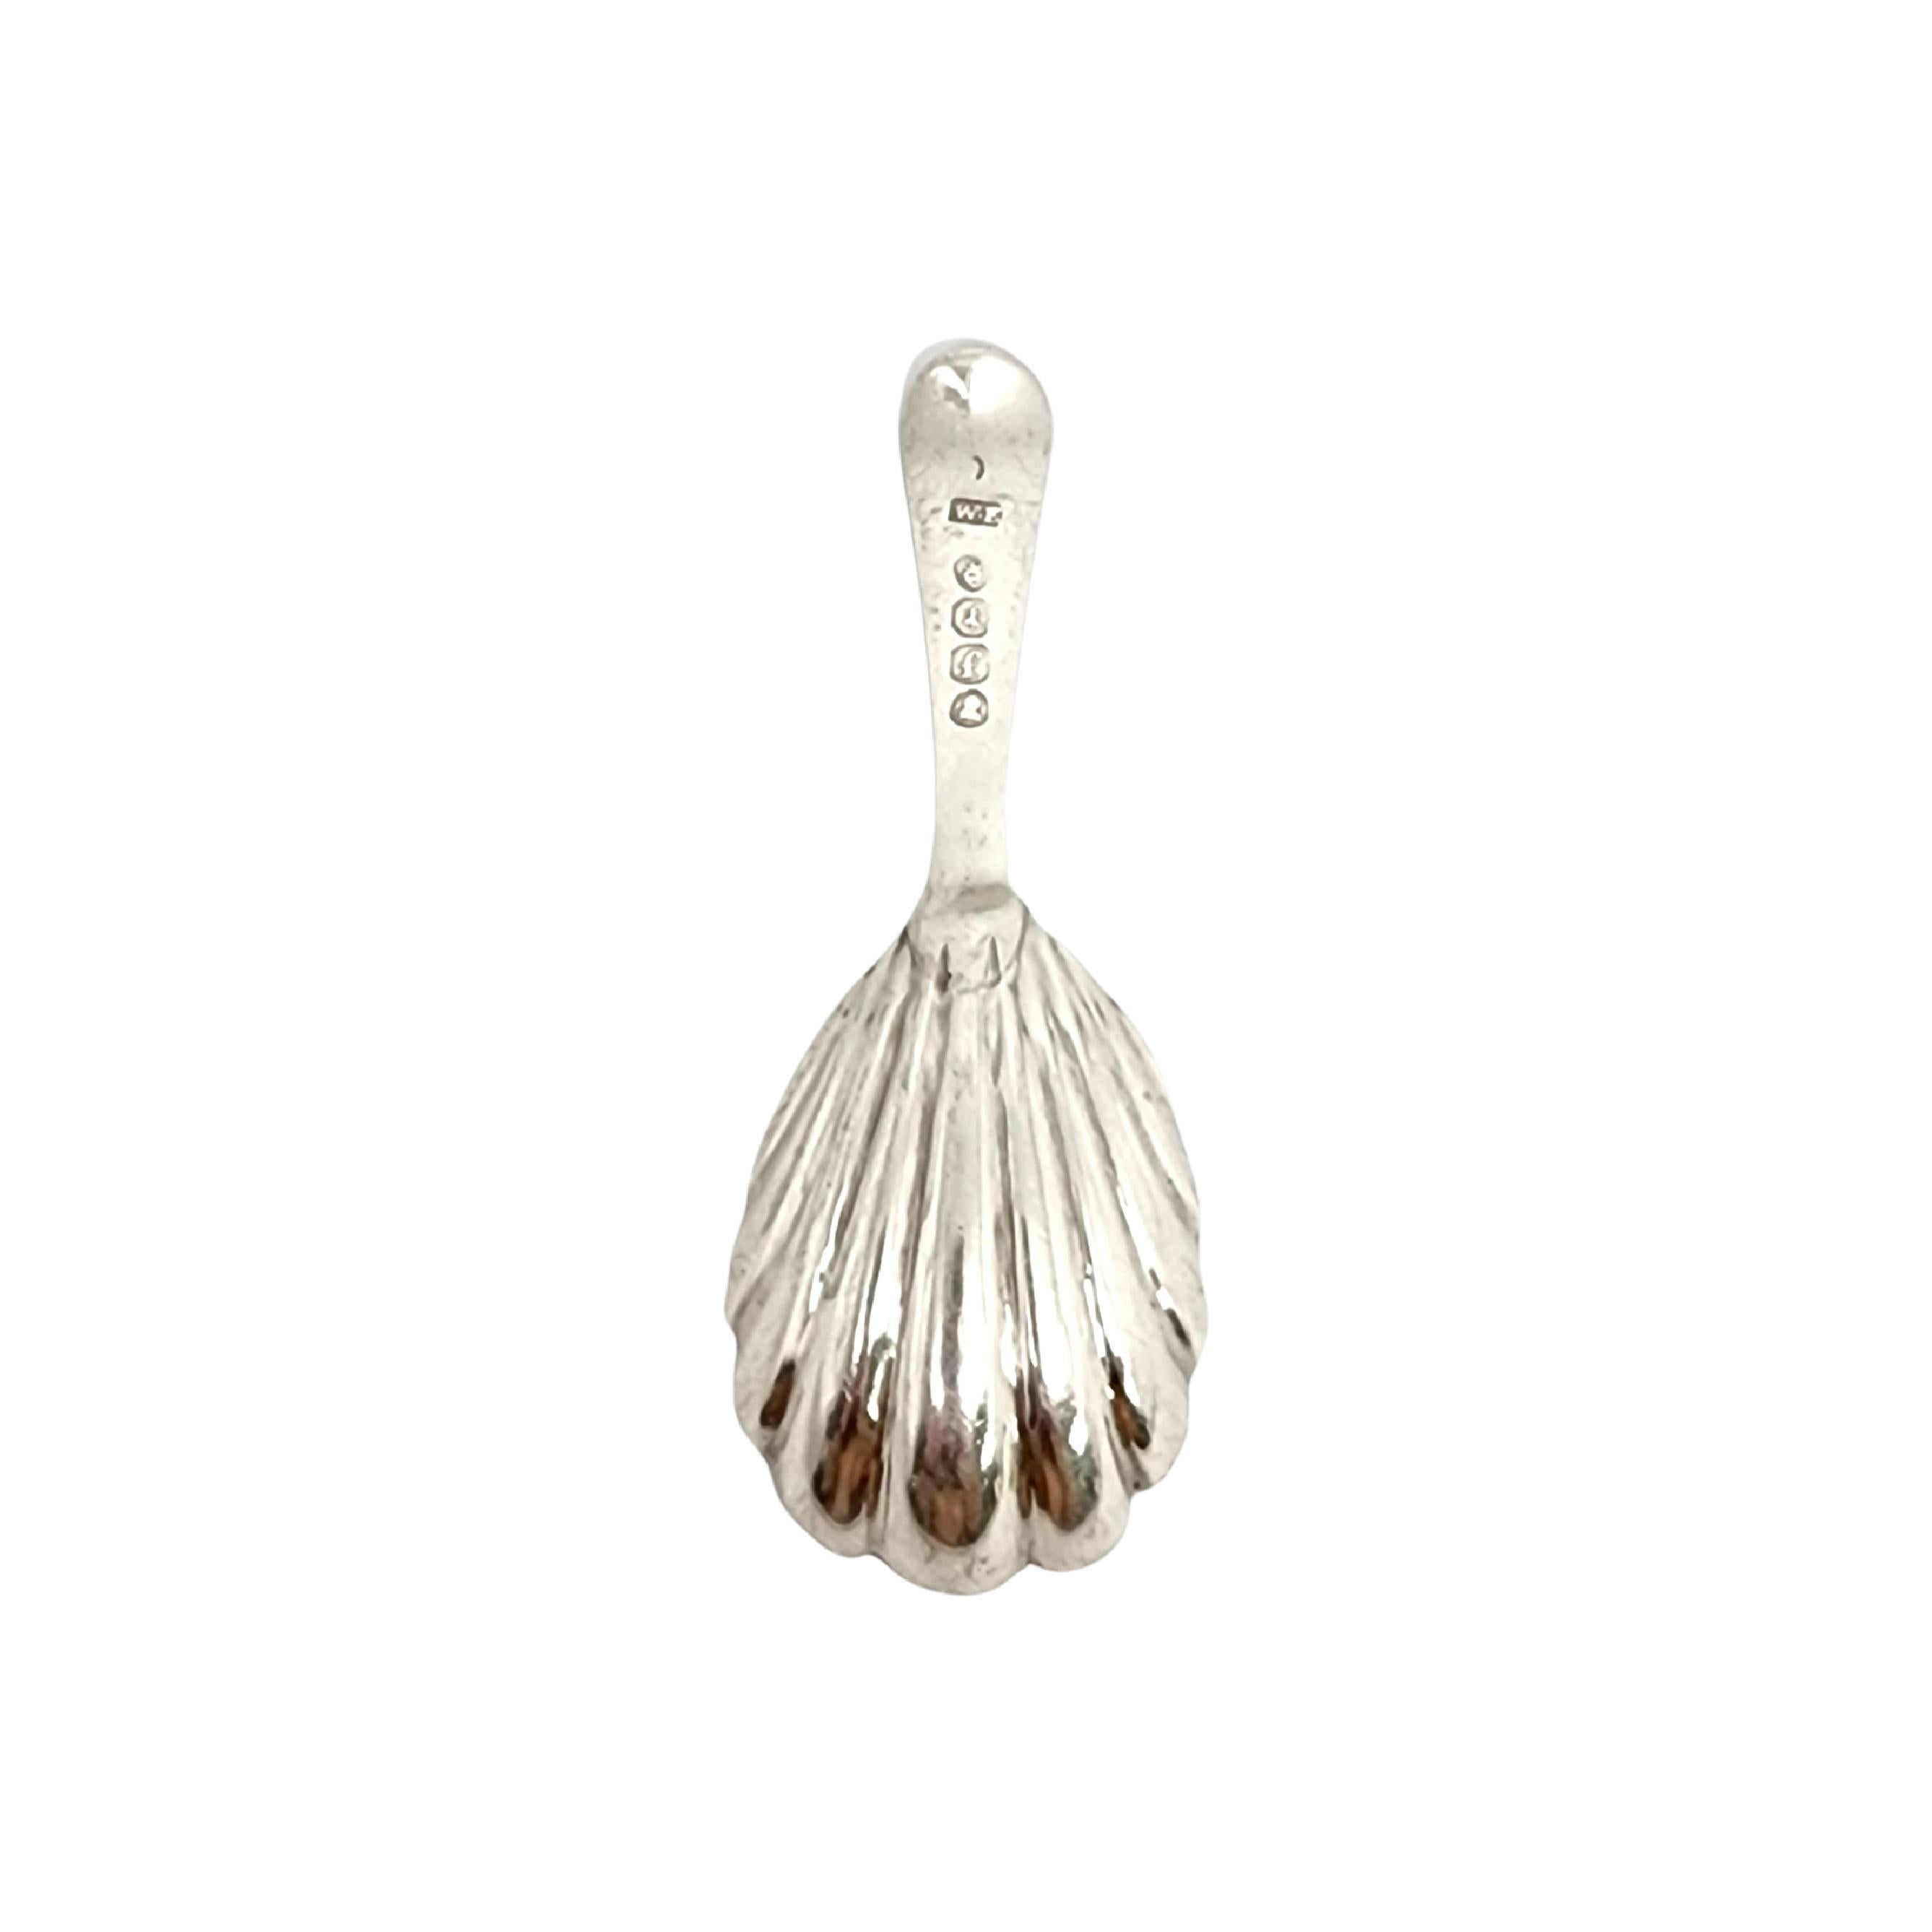 Antique sterling silver tea caddy spoon from London, England, circa 1821.

A scallop shell bowl with a bright cut design handle. No monogram.

Measures approx 3 3/4